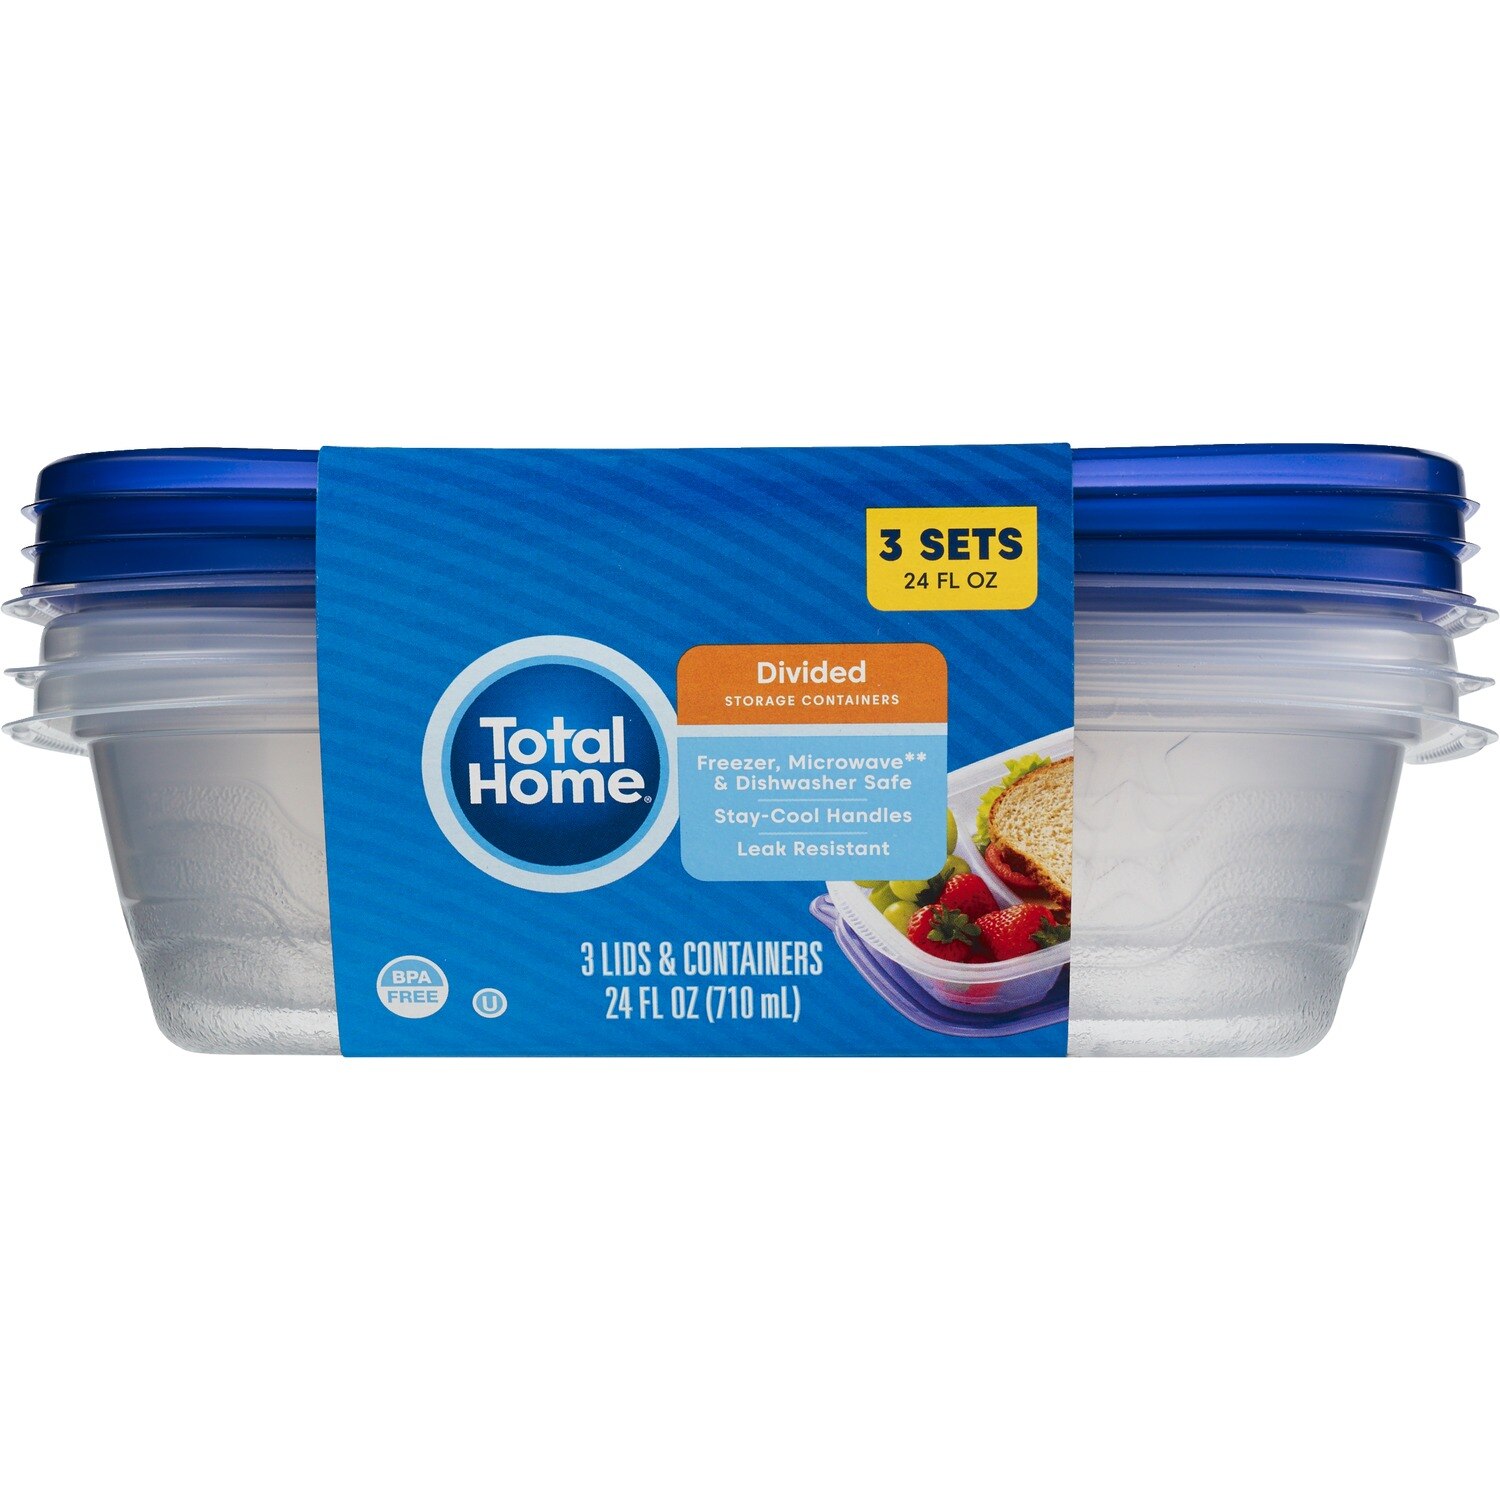 Total Home Divided Food Storage Containers, 24oz, 3CT